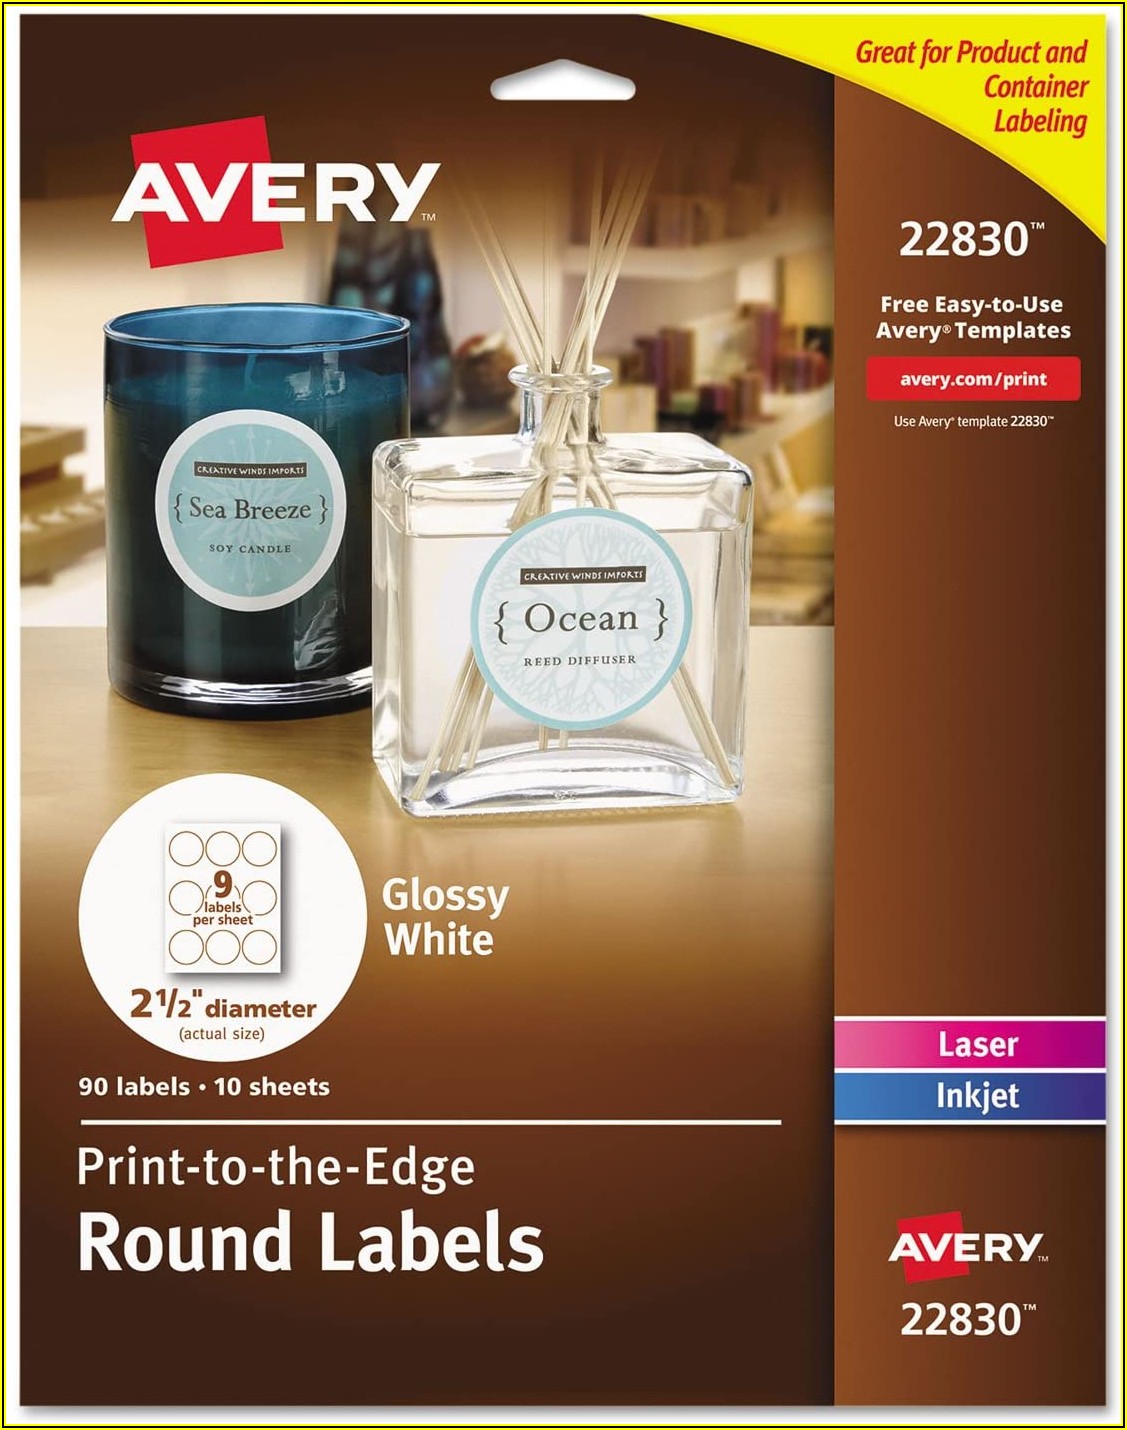 Avery 2 12 Round Label Template